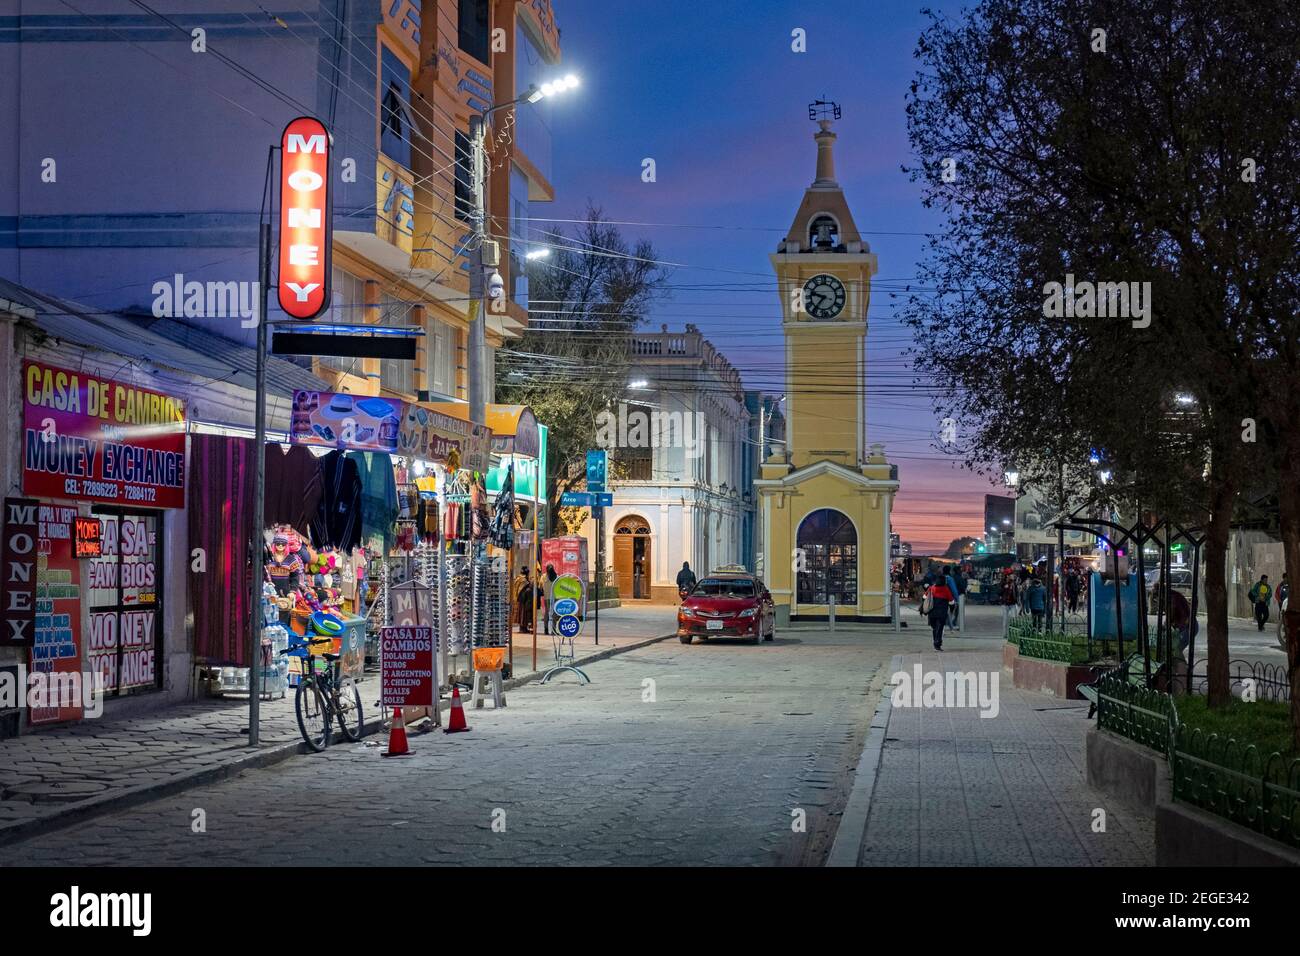 Shops in the main street and yellow clock tower in the city Uyuni after sunset, Antonio Quijarro Province, Potosí Department, Bolivia Stock Photo